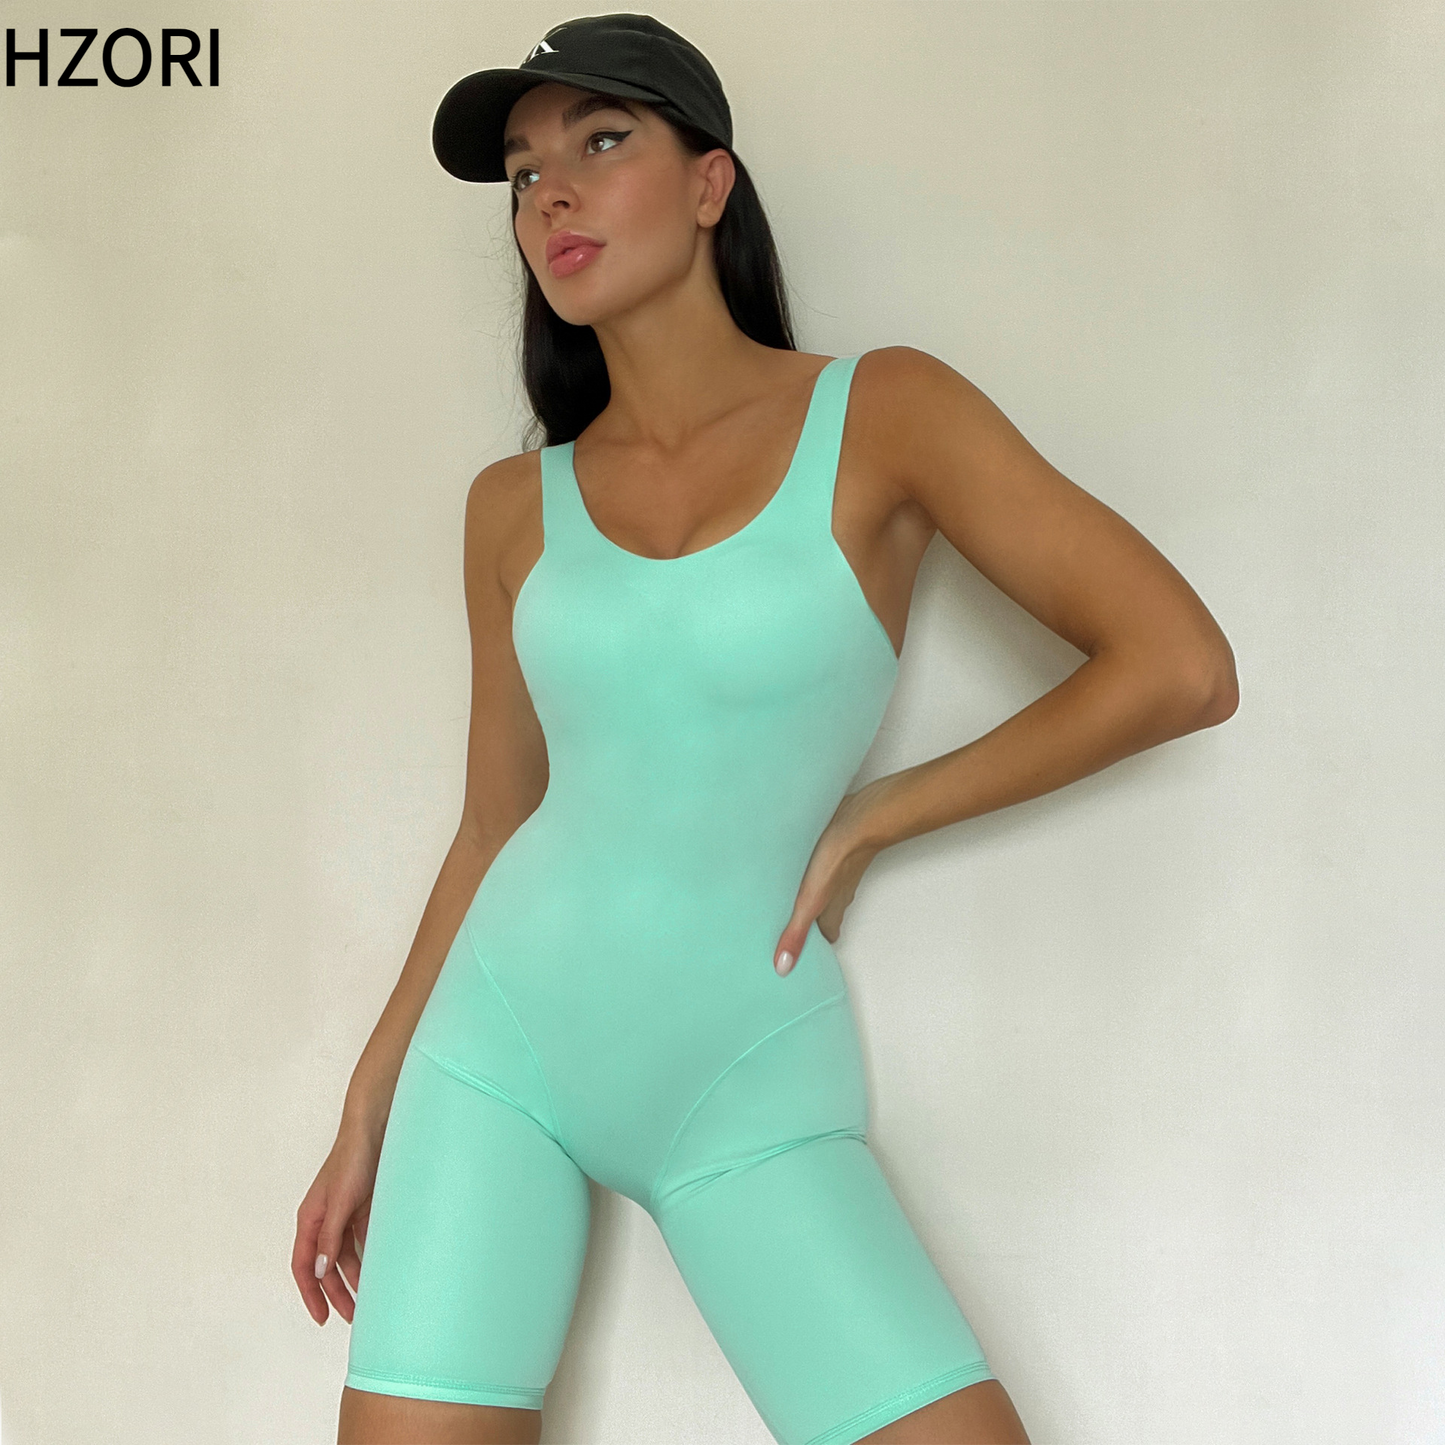 Hzori Solid Color One-Piece Fitness Exercise Yoga Clothes Women's Slim Slimming Deep U Beauty Back Yoga Jumpsuit